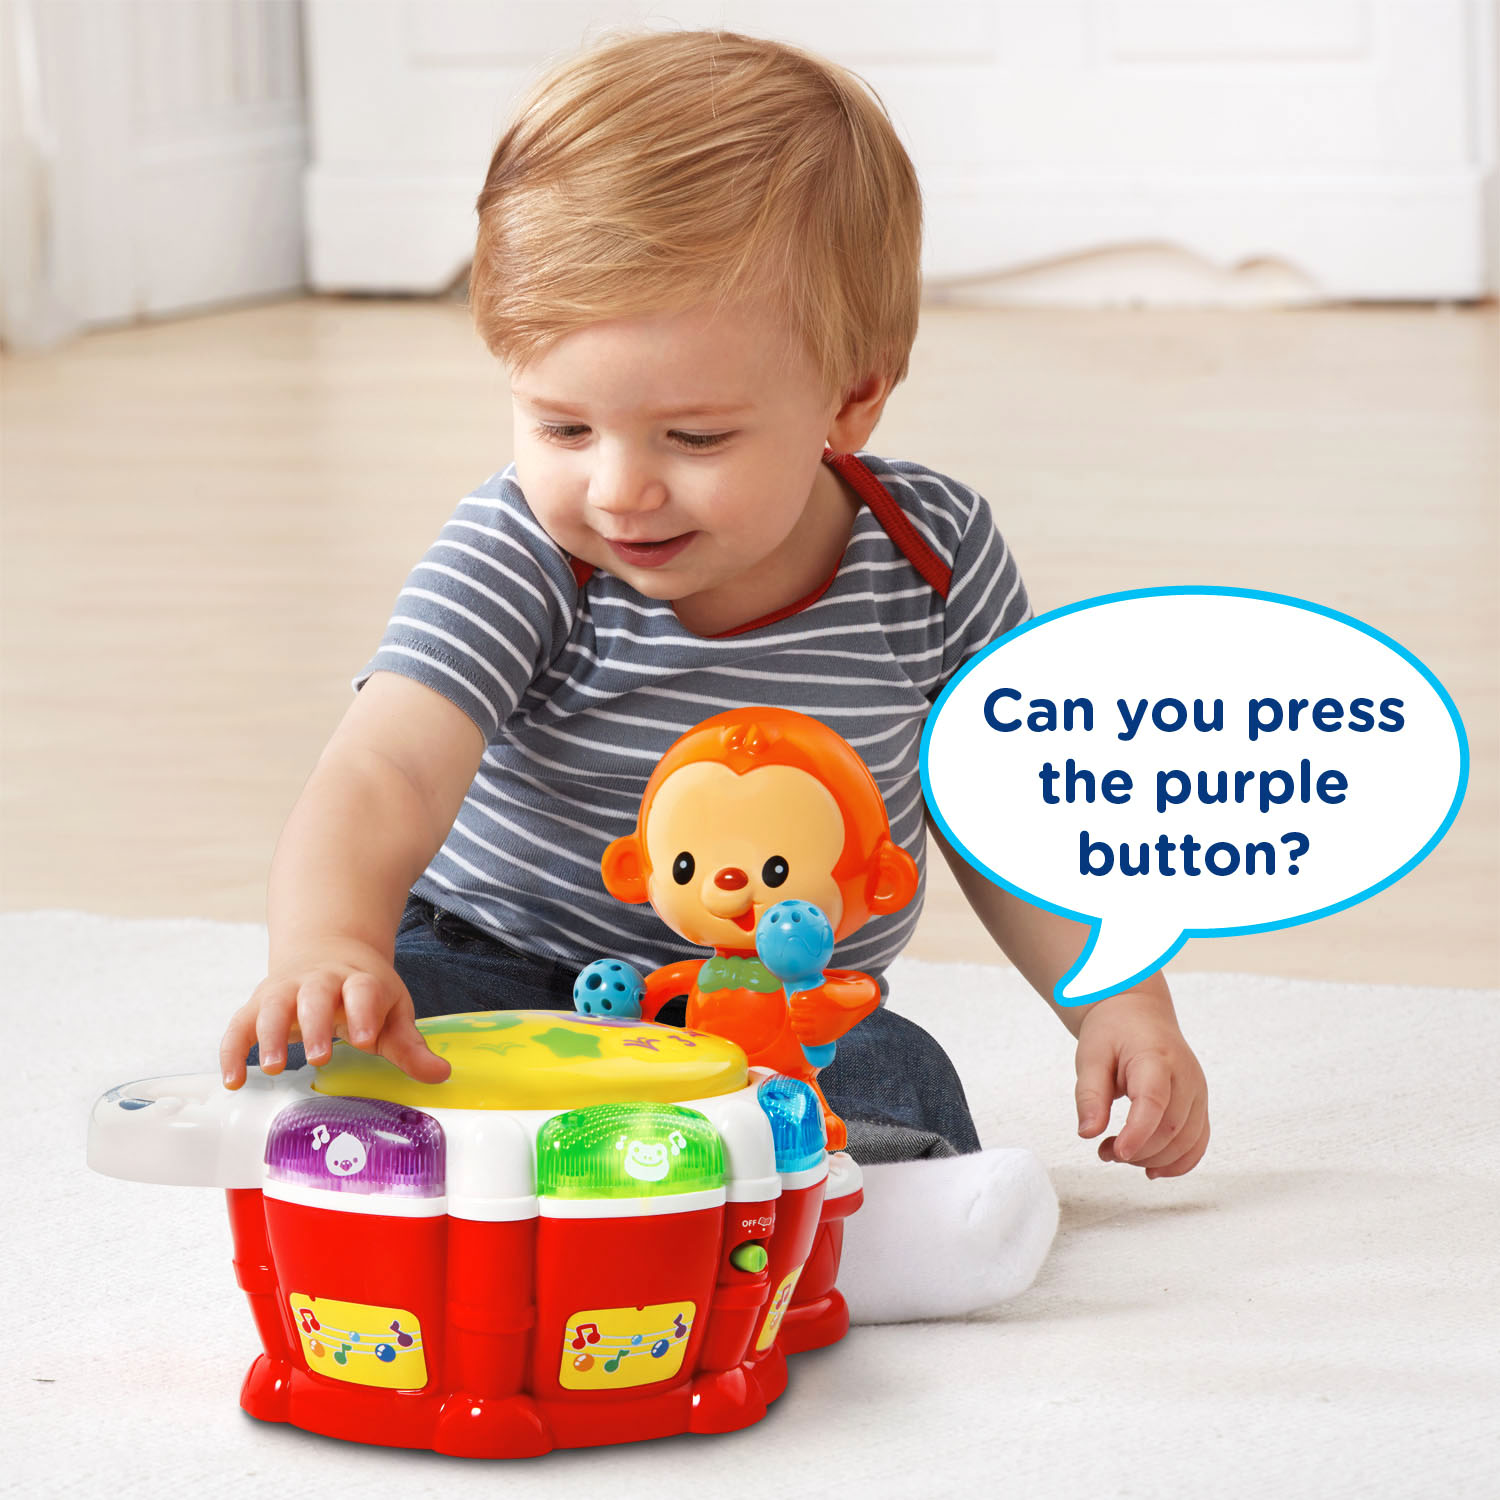 VTech Baby Beats Monkey Drum, Fun Animated Music Toy for Infant - image 2 of 9